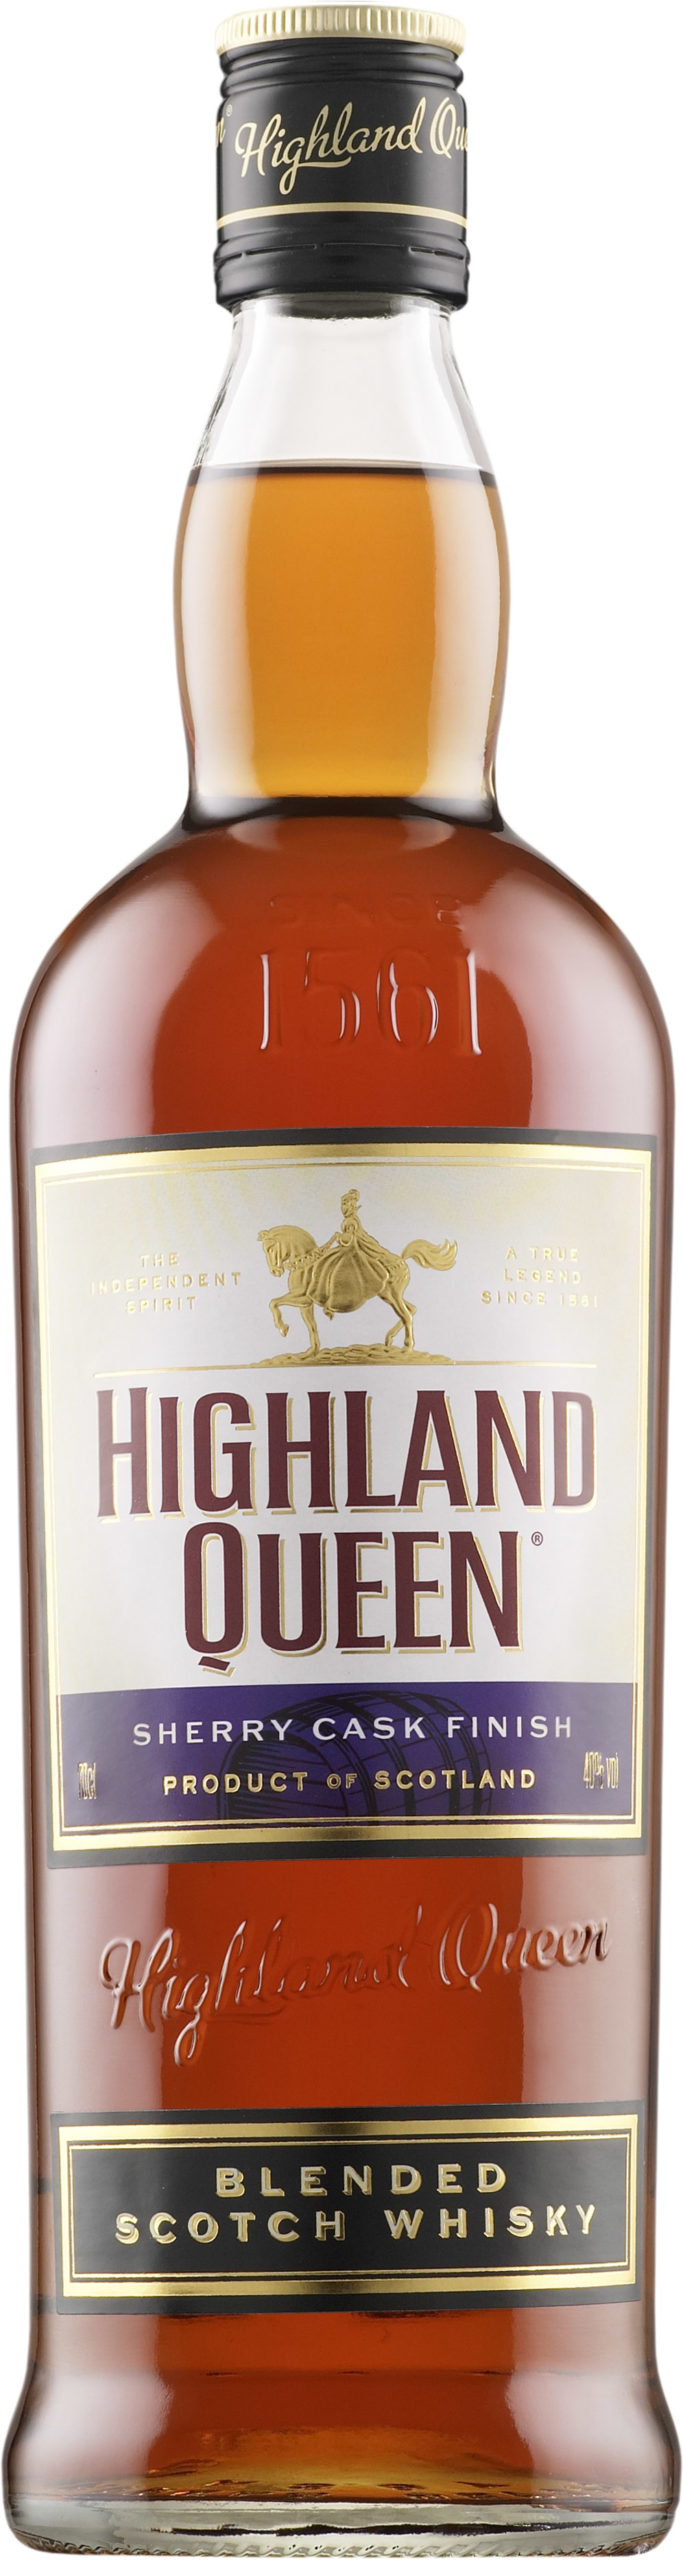 Highland Queen Sherry Finish